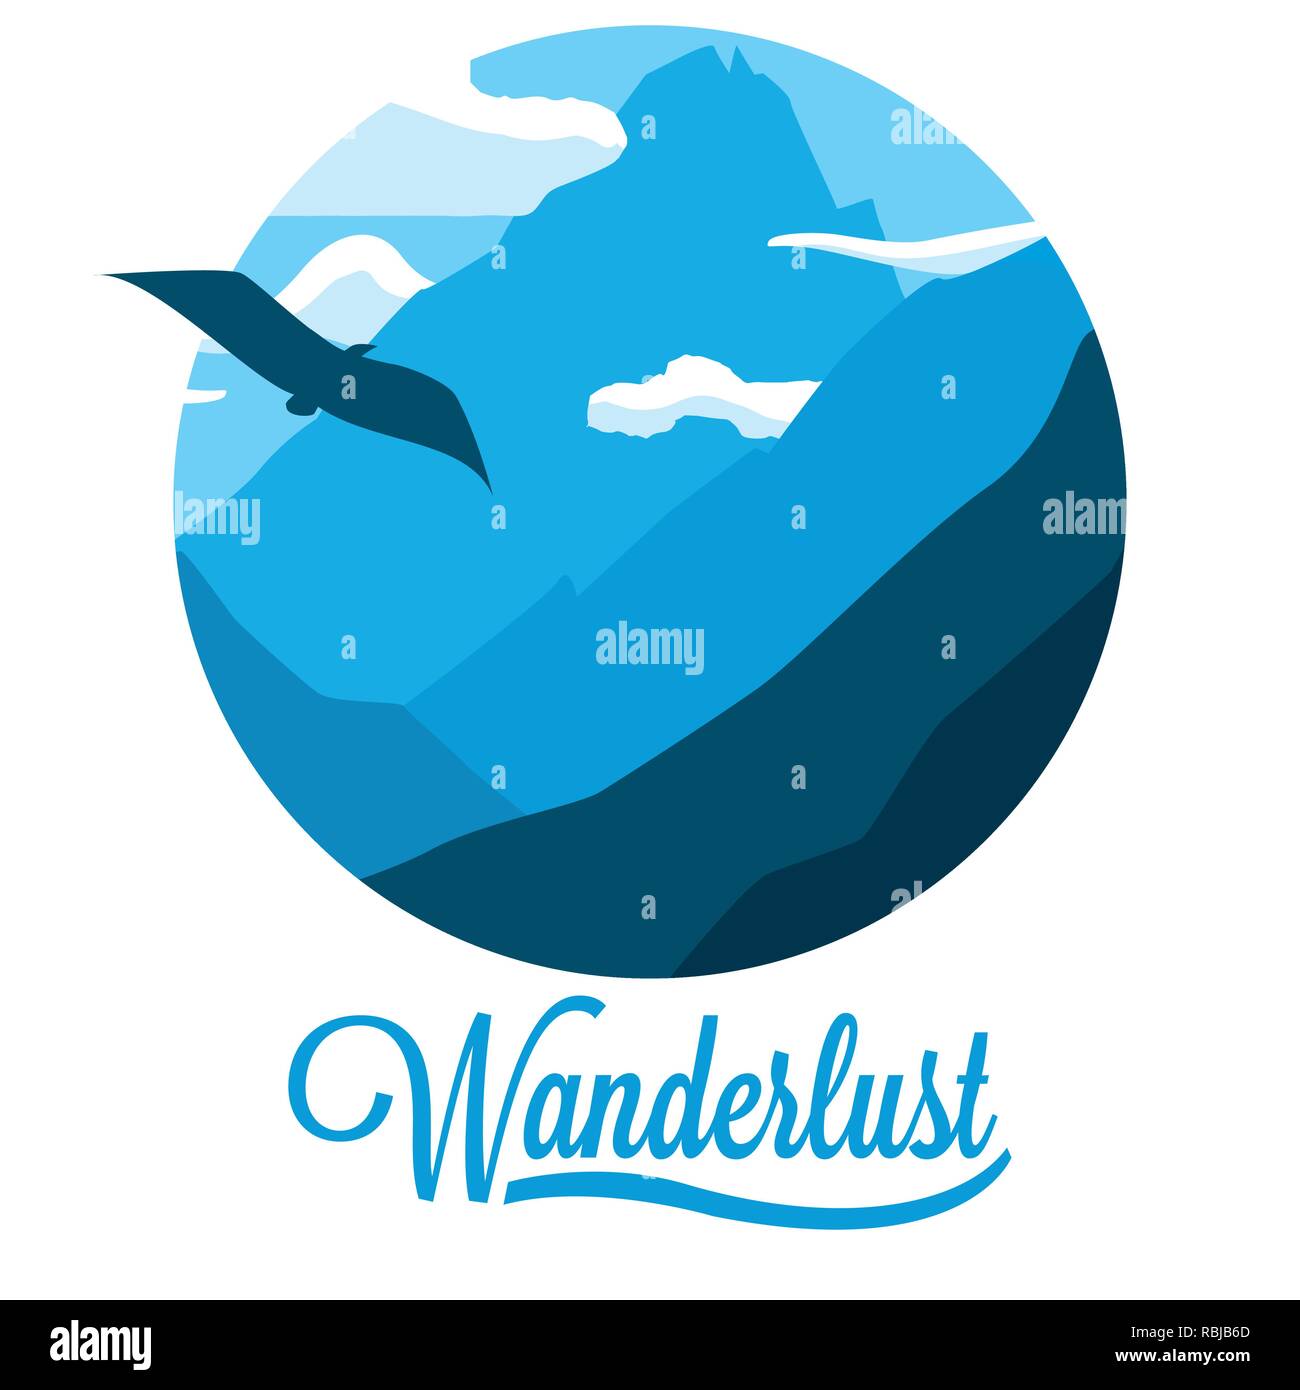 scene landscape with mountains and wanderlust vector illustration design Stock Vector